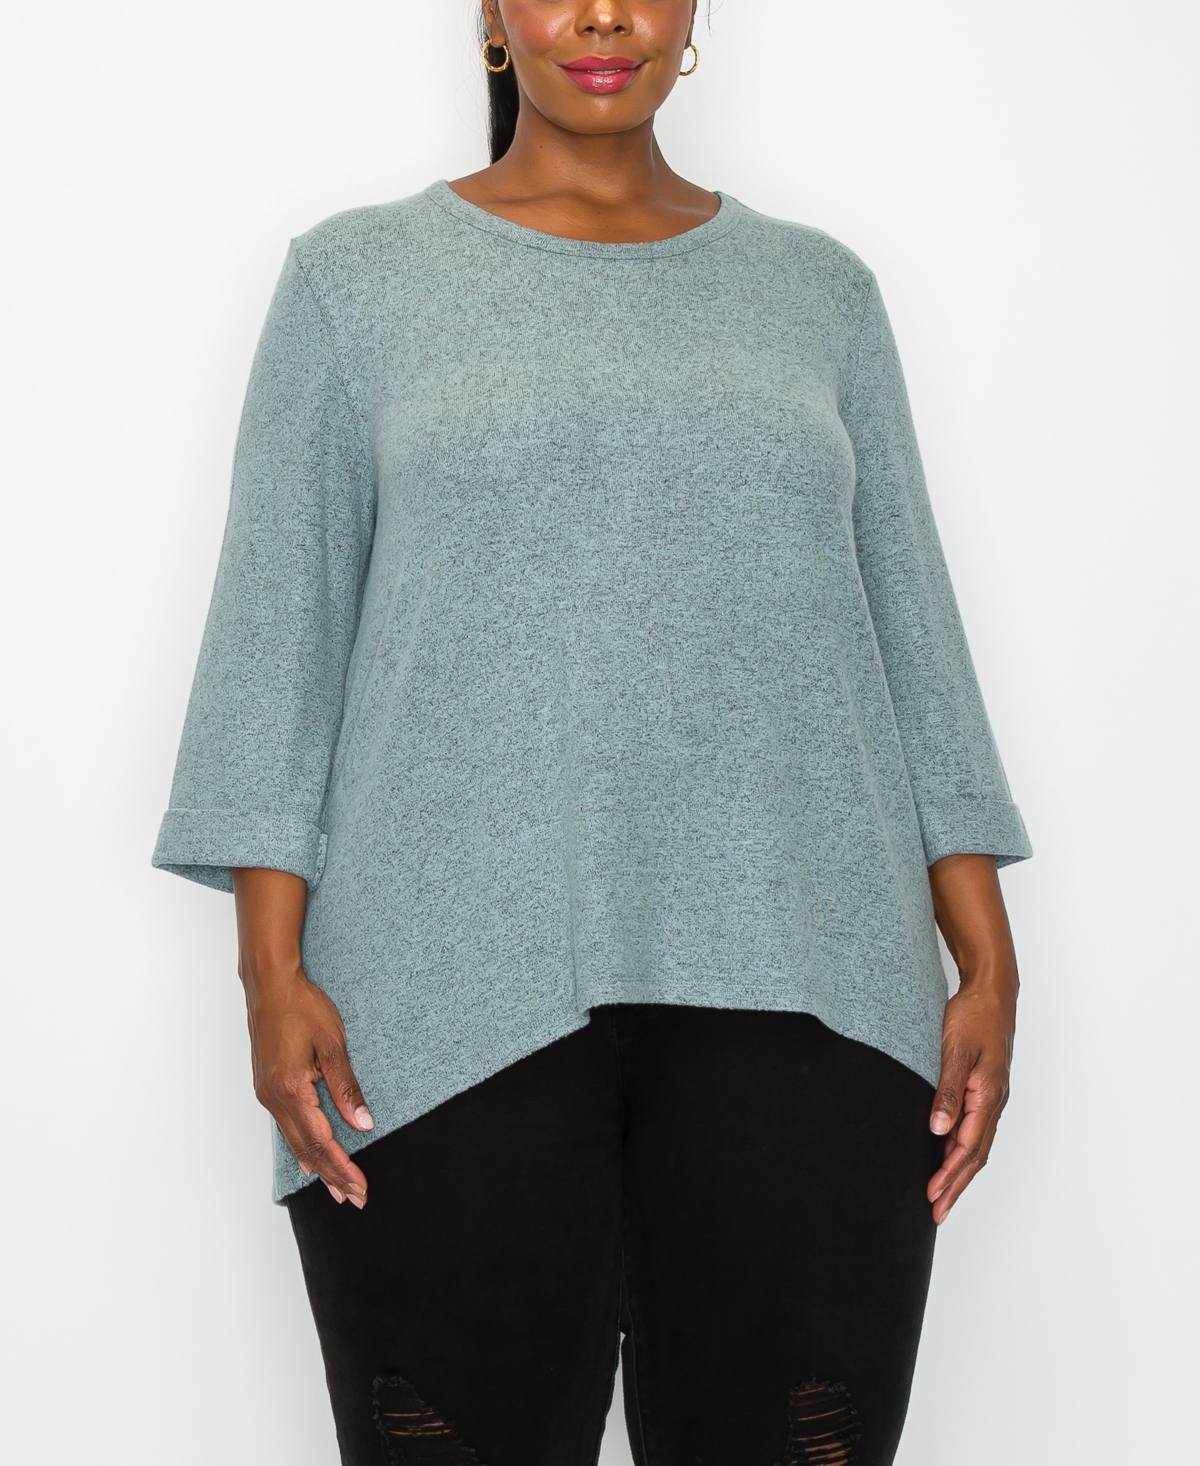 Coin 1804 Plus Size Cozy 3/4 Rolled Sleeve Button Back Top In Seafoam